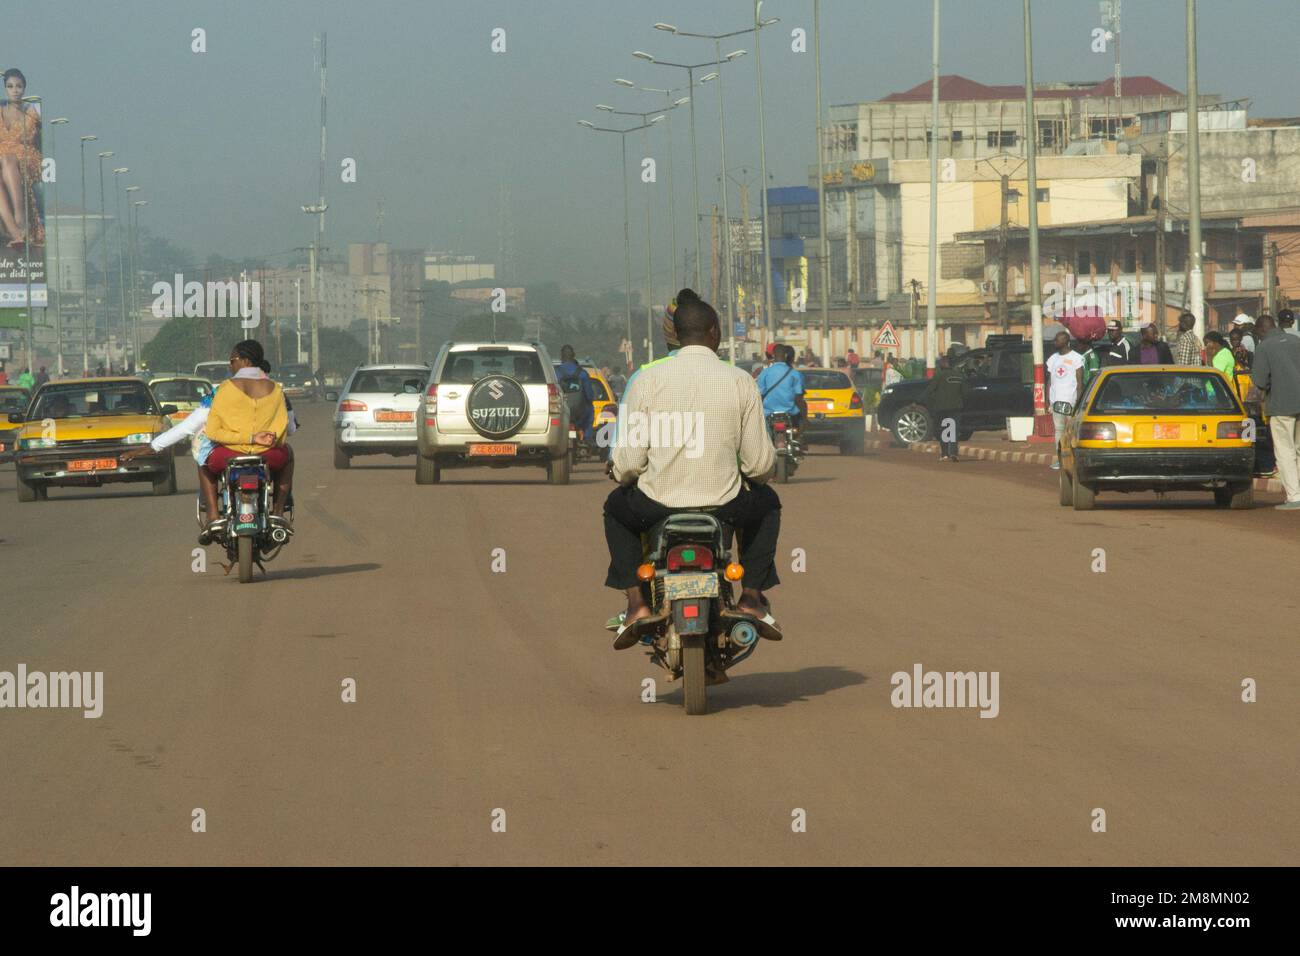 view from Yaounde, Cameroon Stock Photo